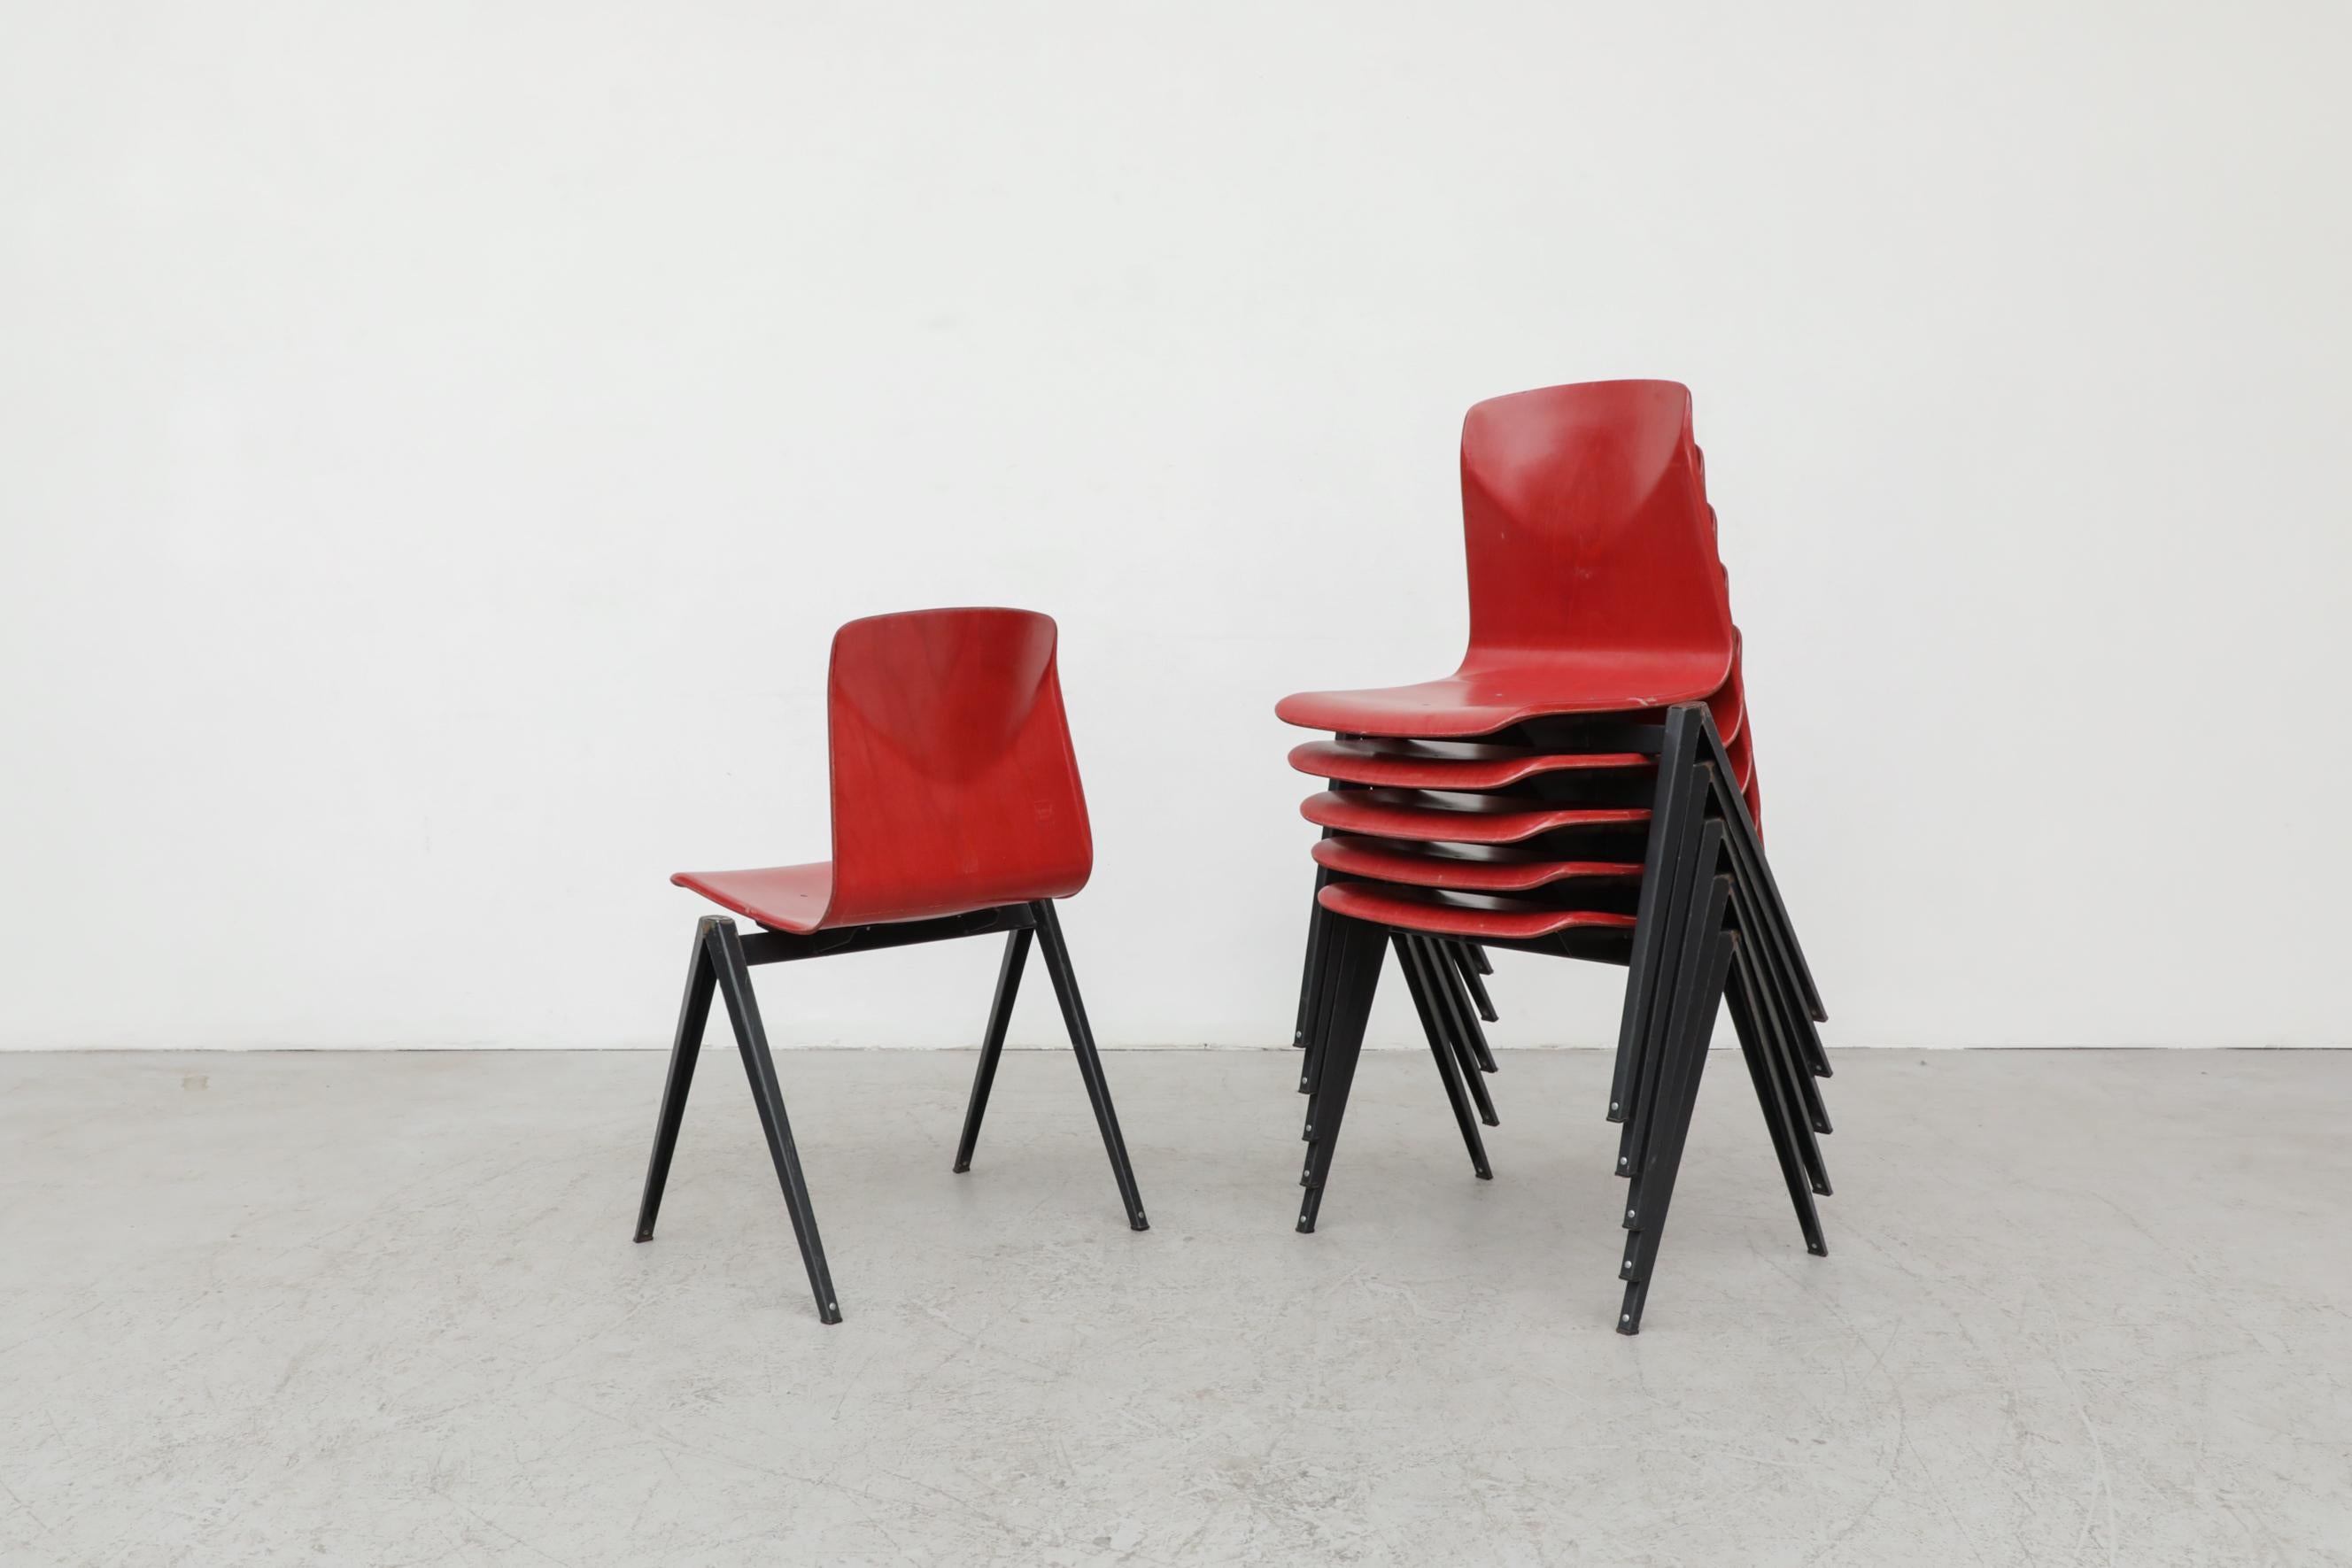 Enameled Rare Red Prouve Style Stacking Chairs with Dark Metal Compass Legs For Sale